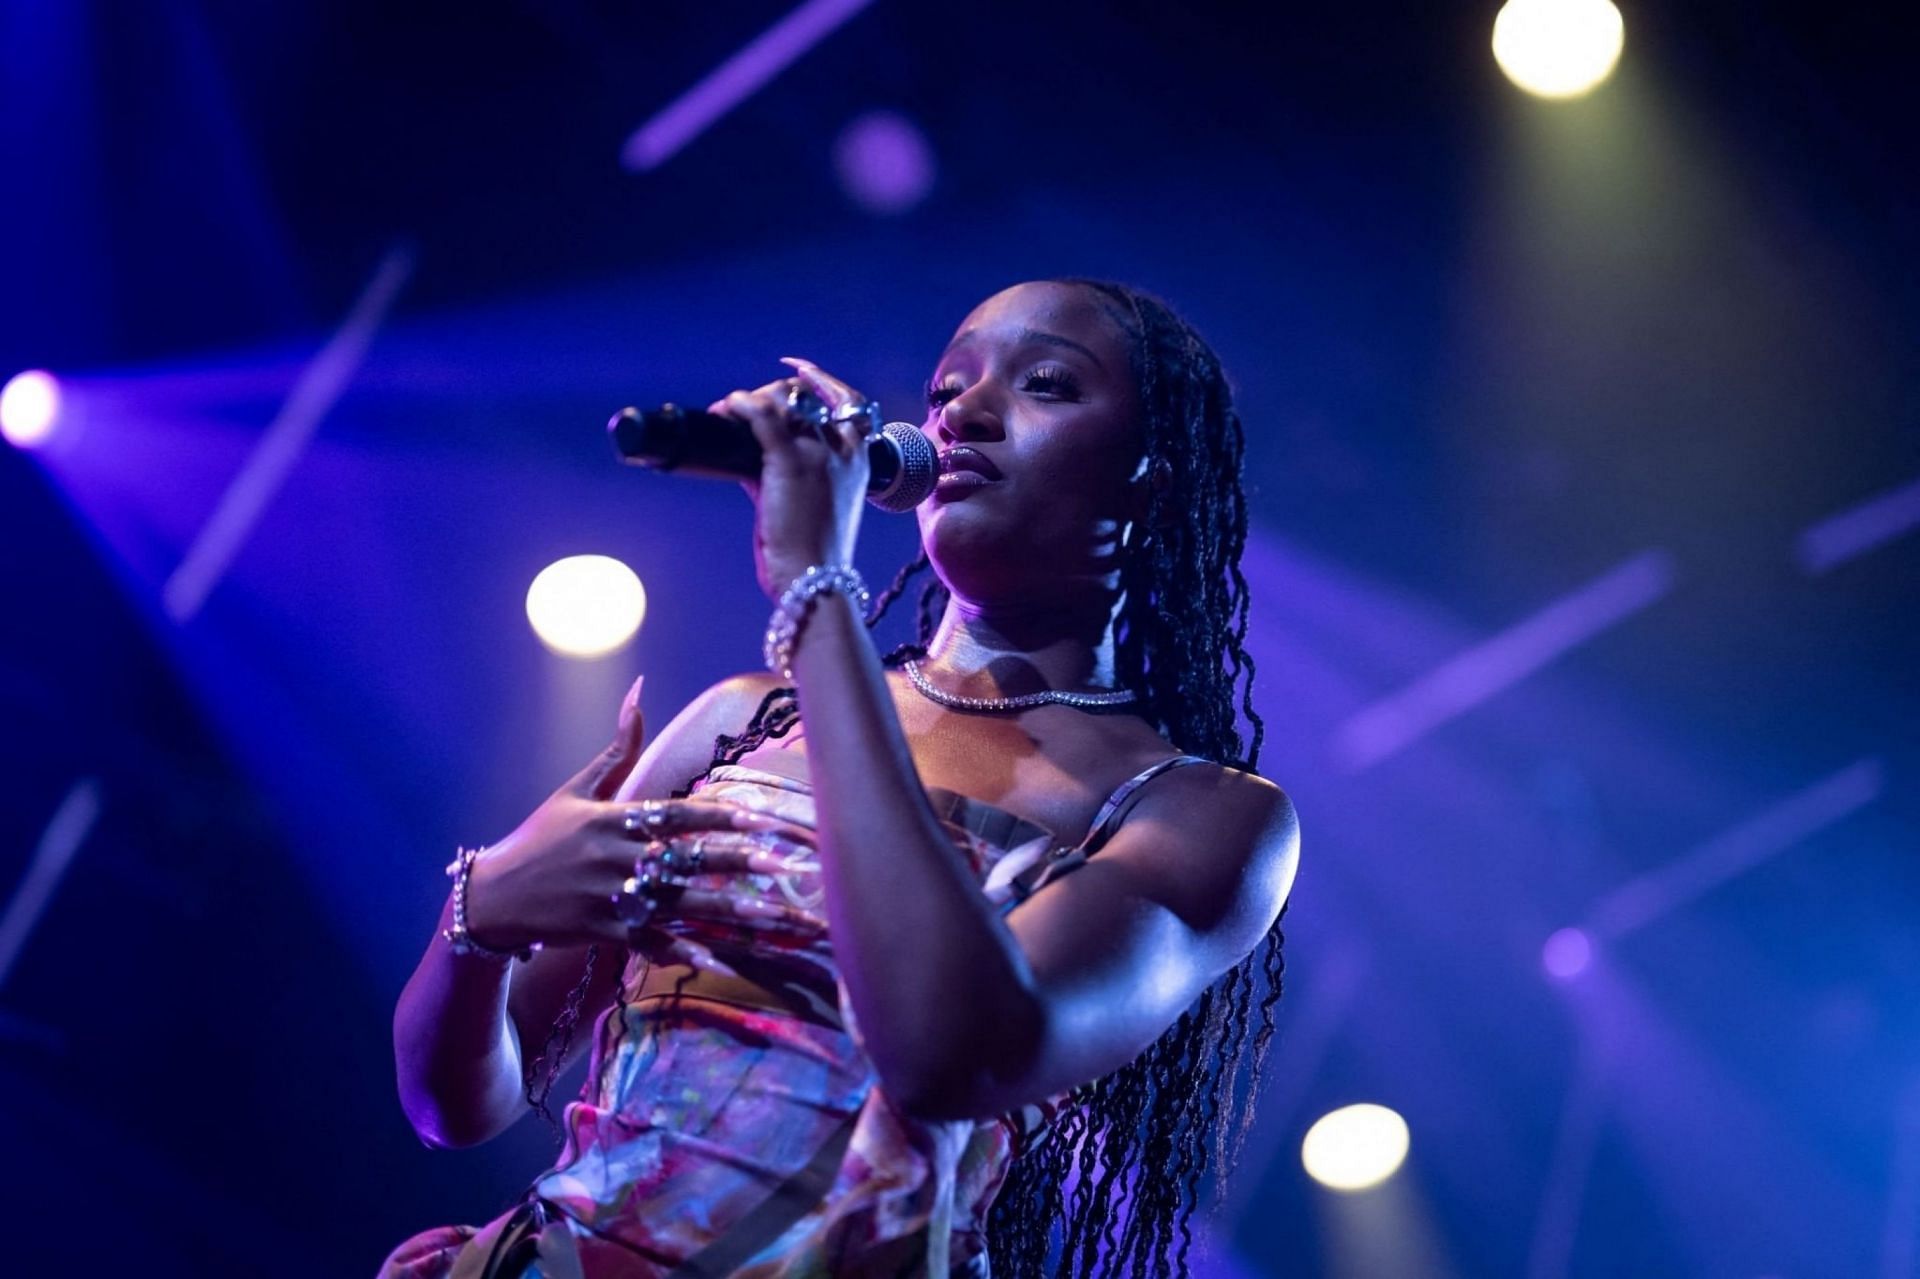 Ayra Starr at the 57th Montreux Jazz Festival in Montreux on July 4, 2023 (Image via Getty Images)